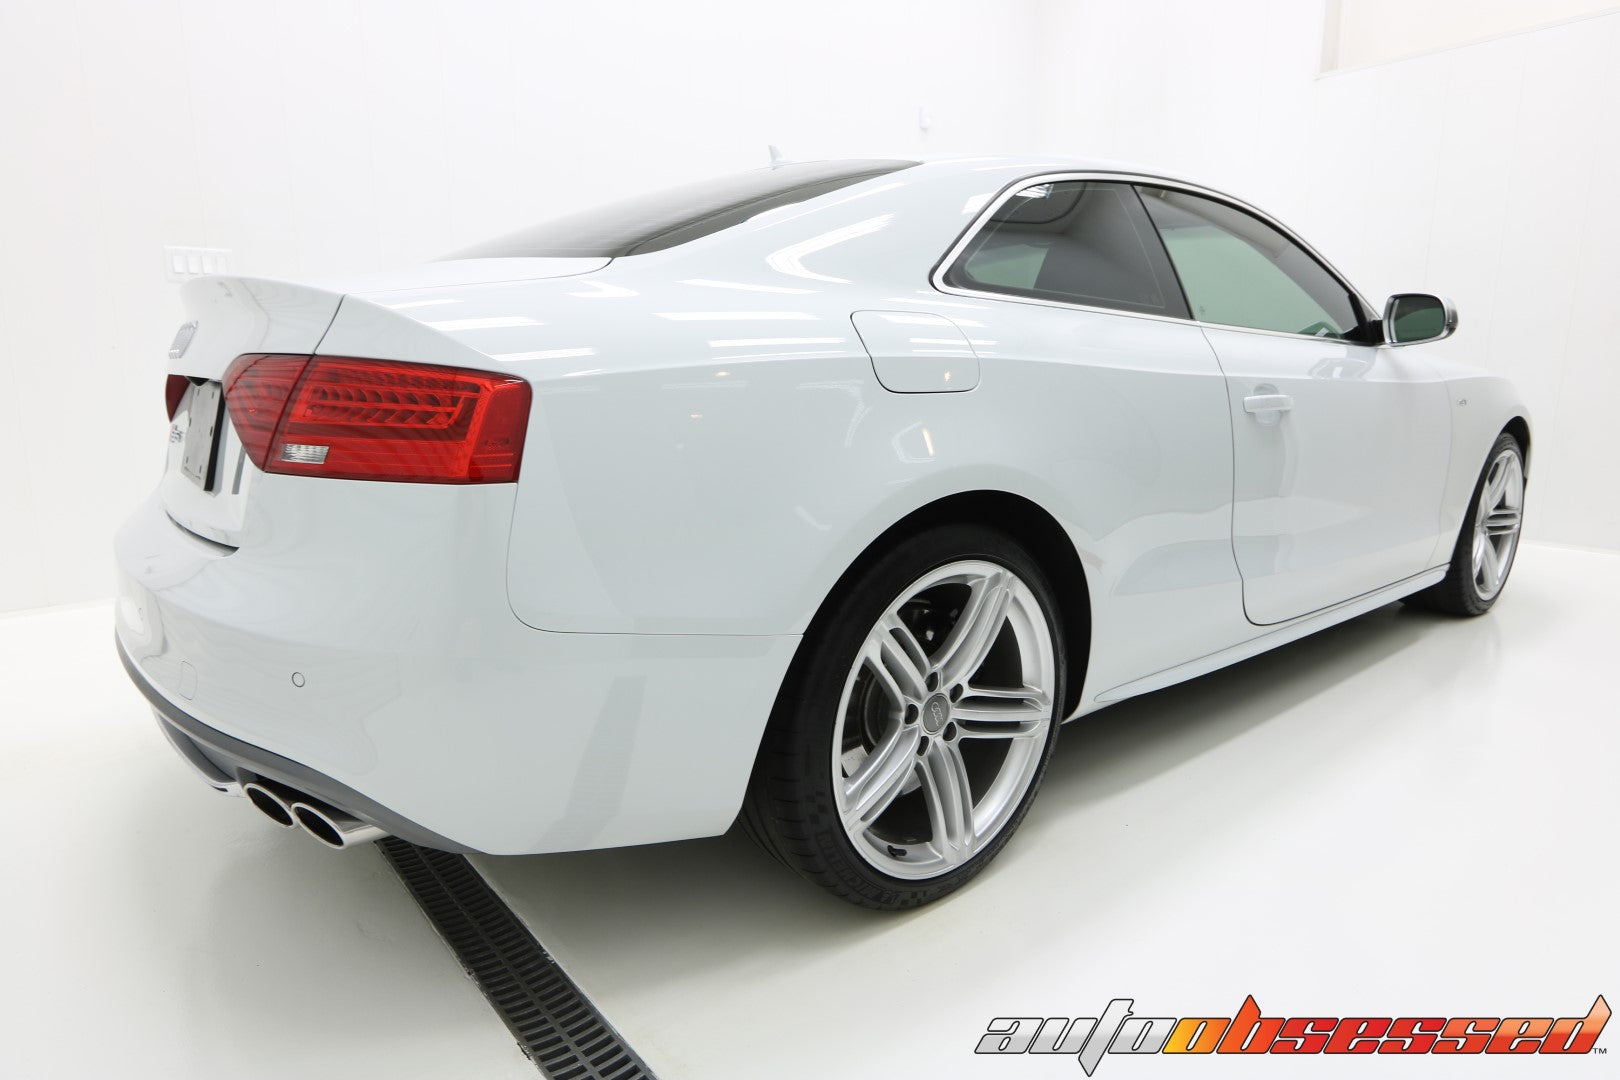 2013 Audi S5 Car Detailing - Auto Obsessed